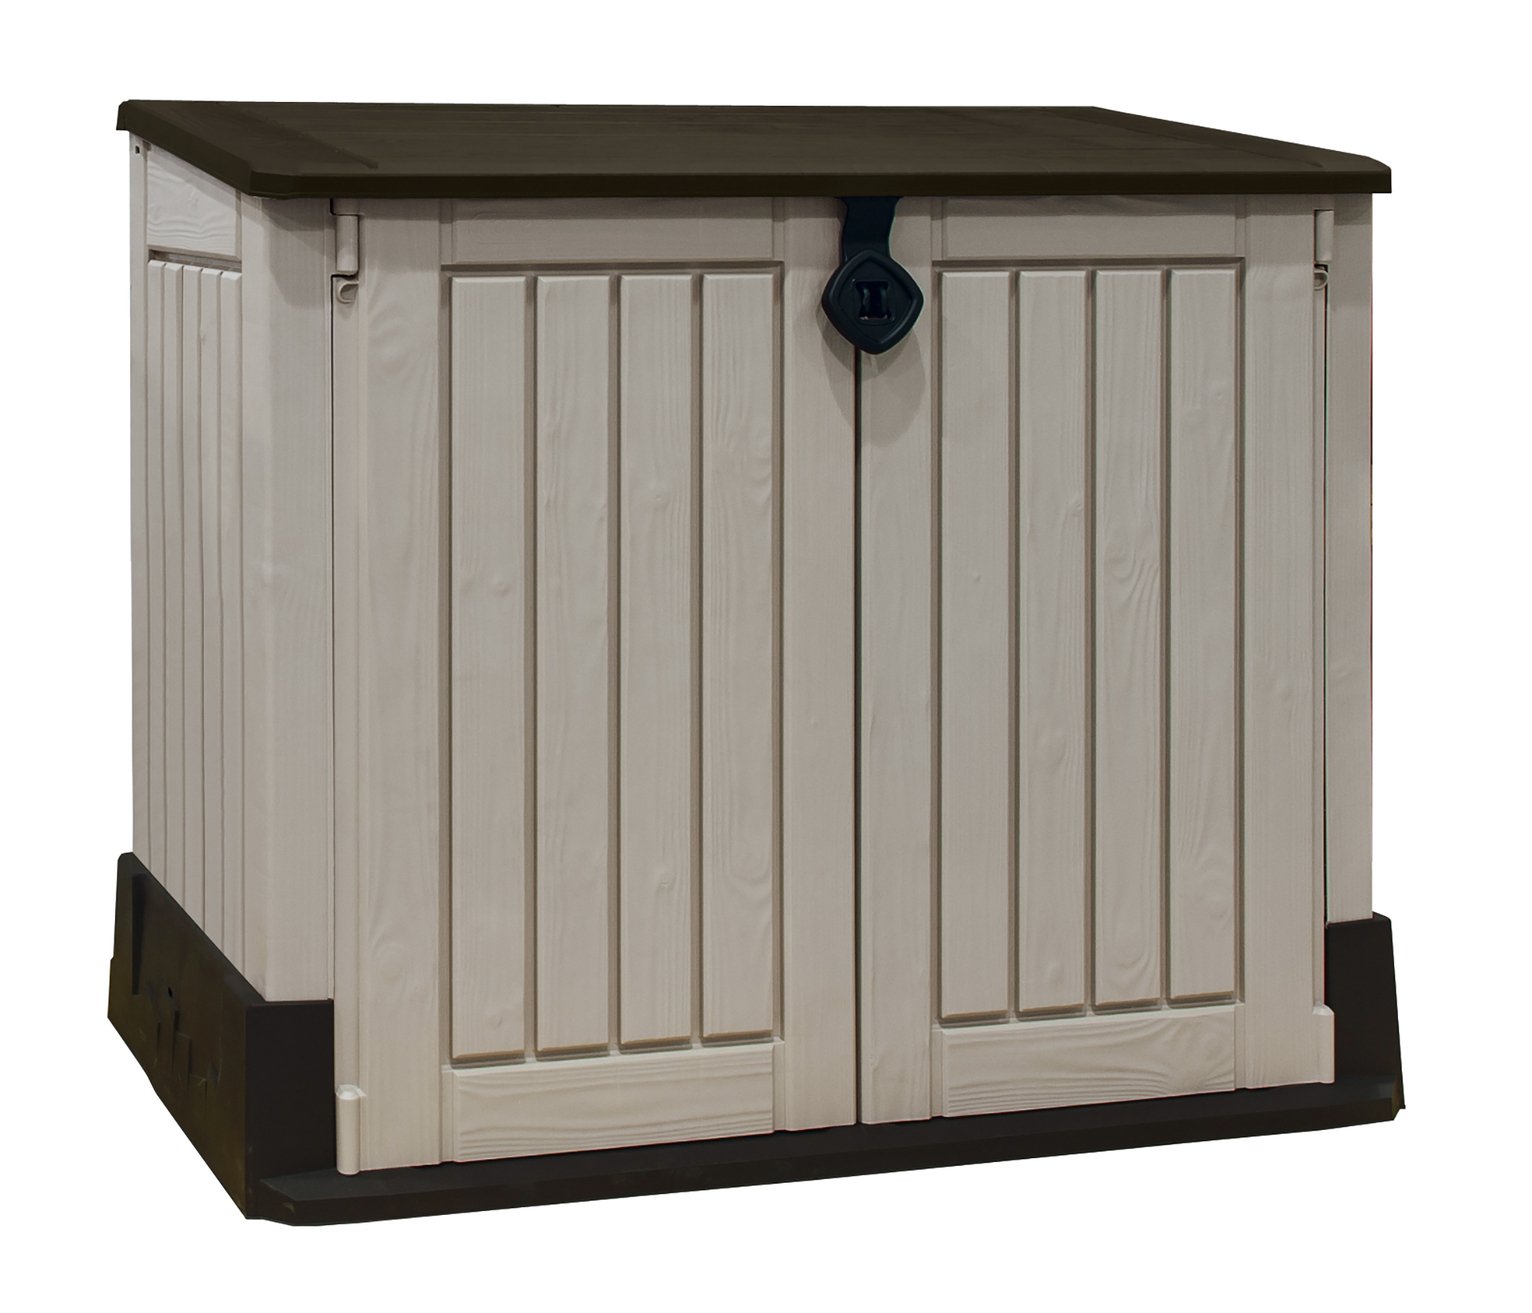 Keter Store It Out Midi 845L Storage Shed - Beige/Brown